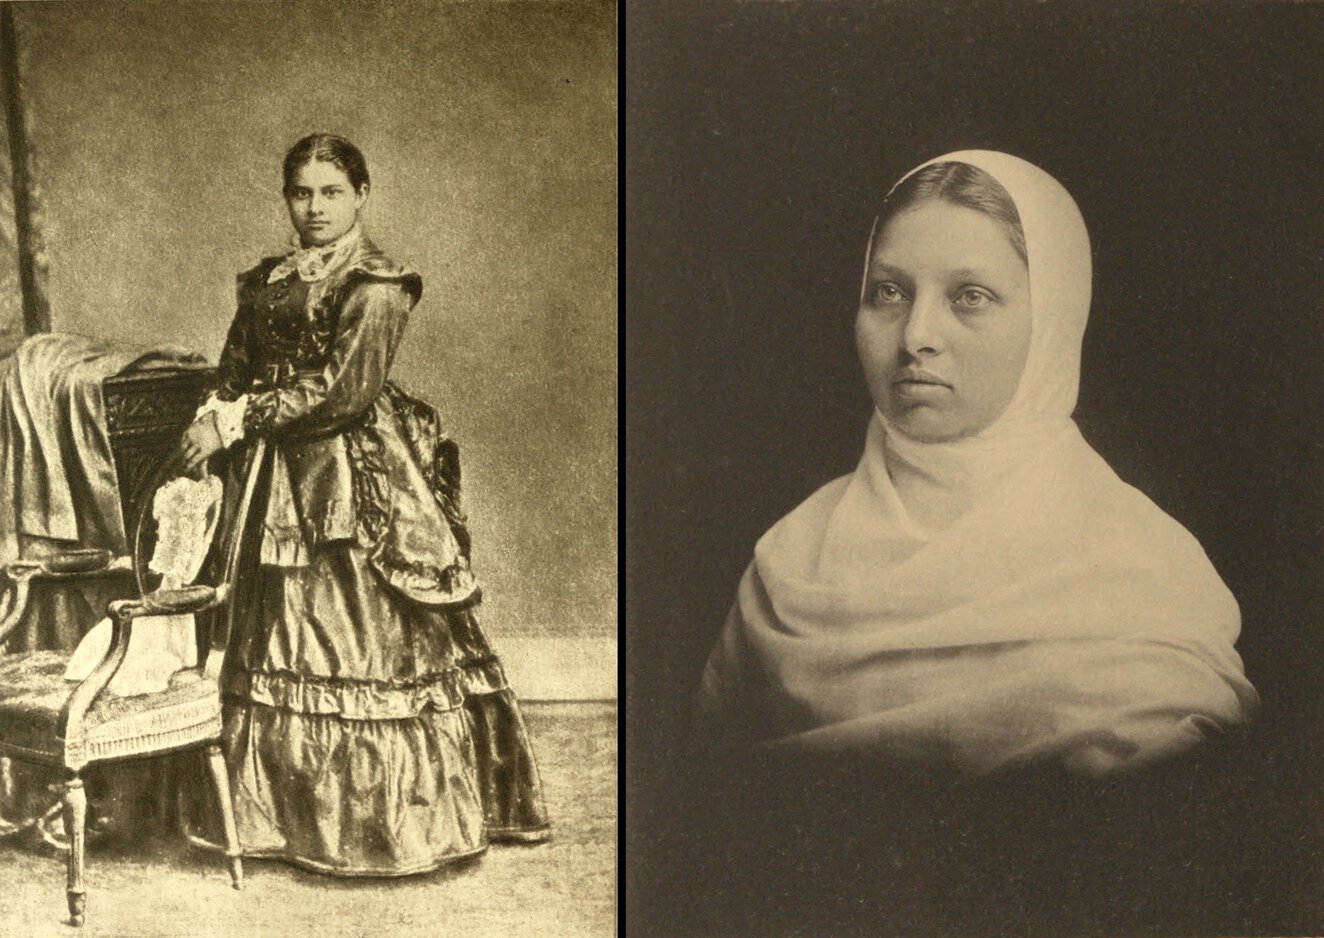 Left: Toru Dutt standing in three-quarter profile to her right with hands on chair, but facing the viewer. Right: Head and shoulders portrait of Pandita Ramabai Sarasvati.